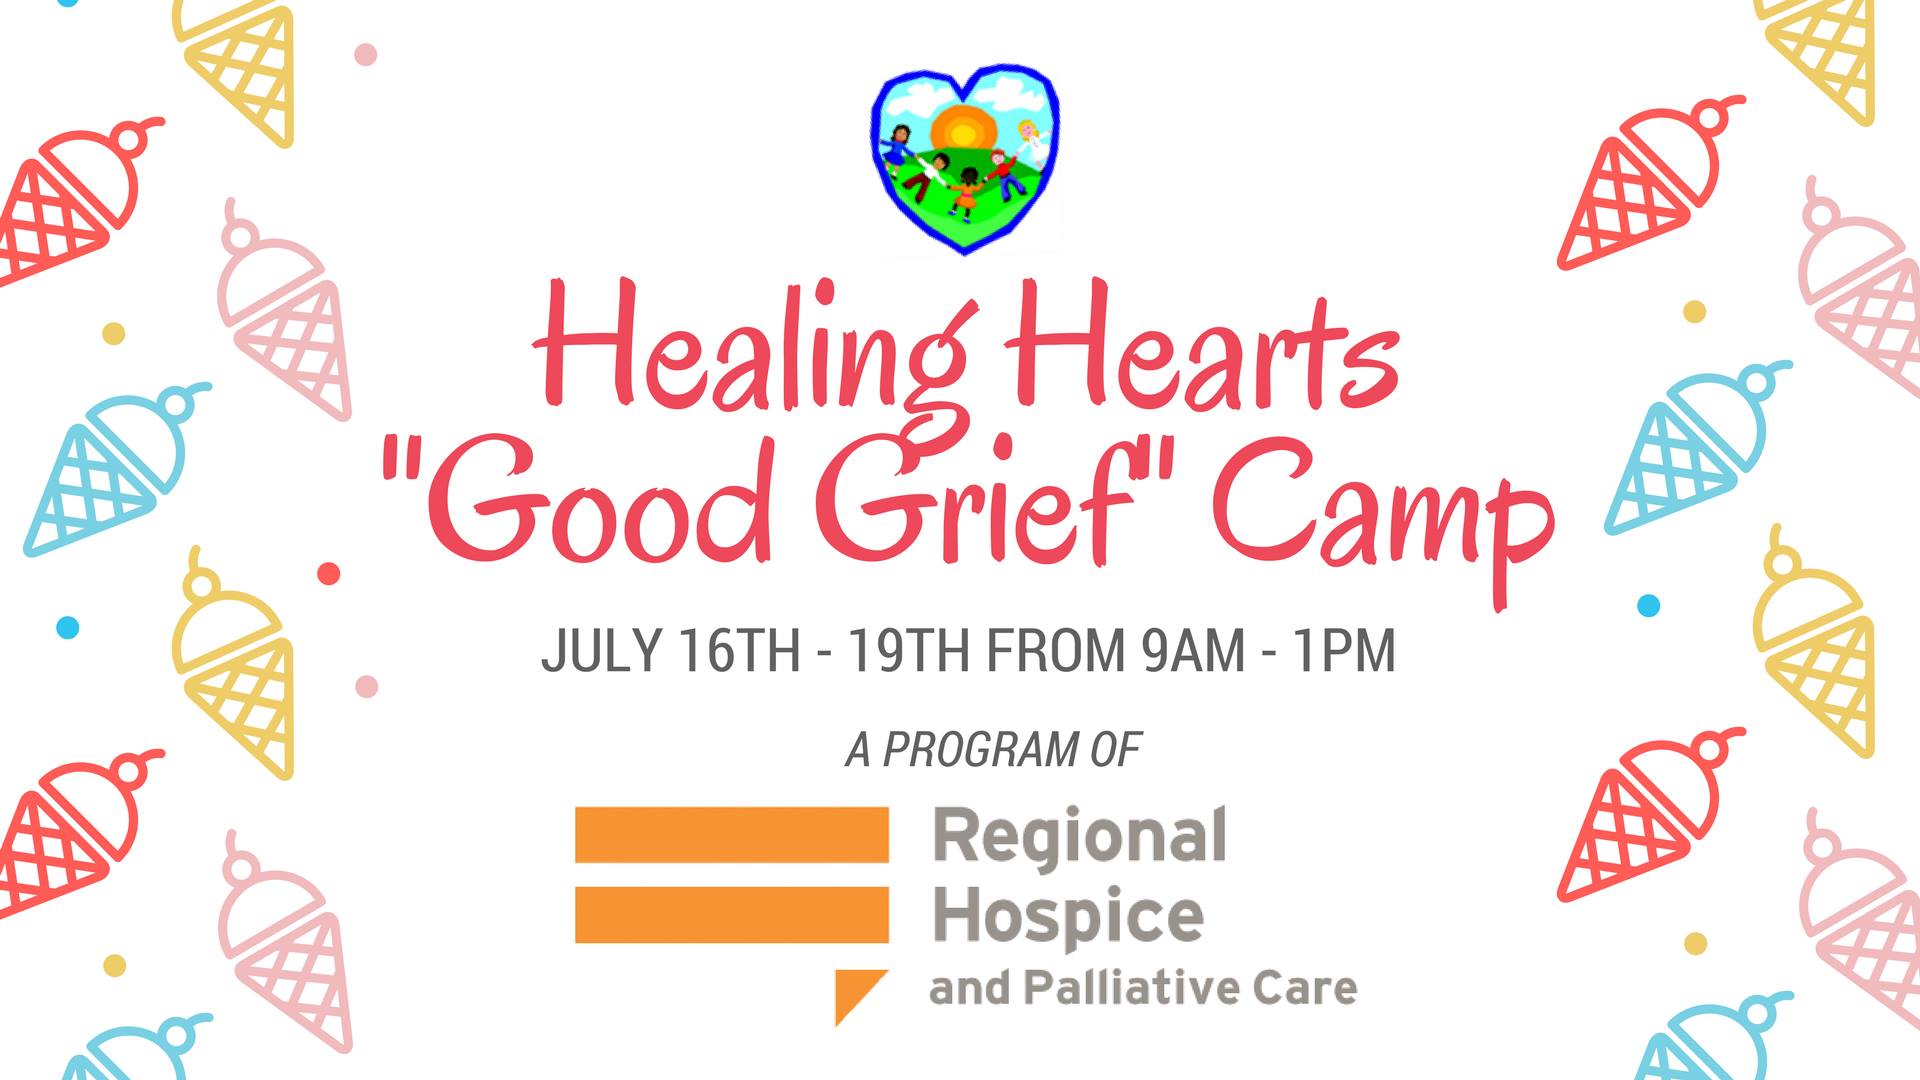 Healing Hearts "Good Grief" Camp for Children